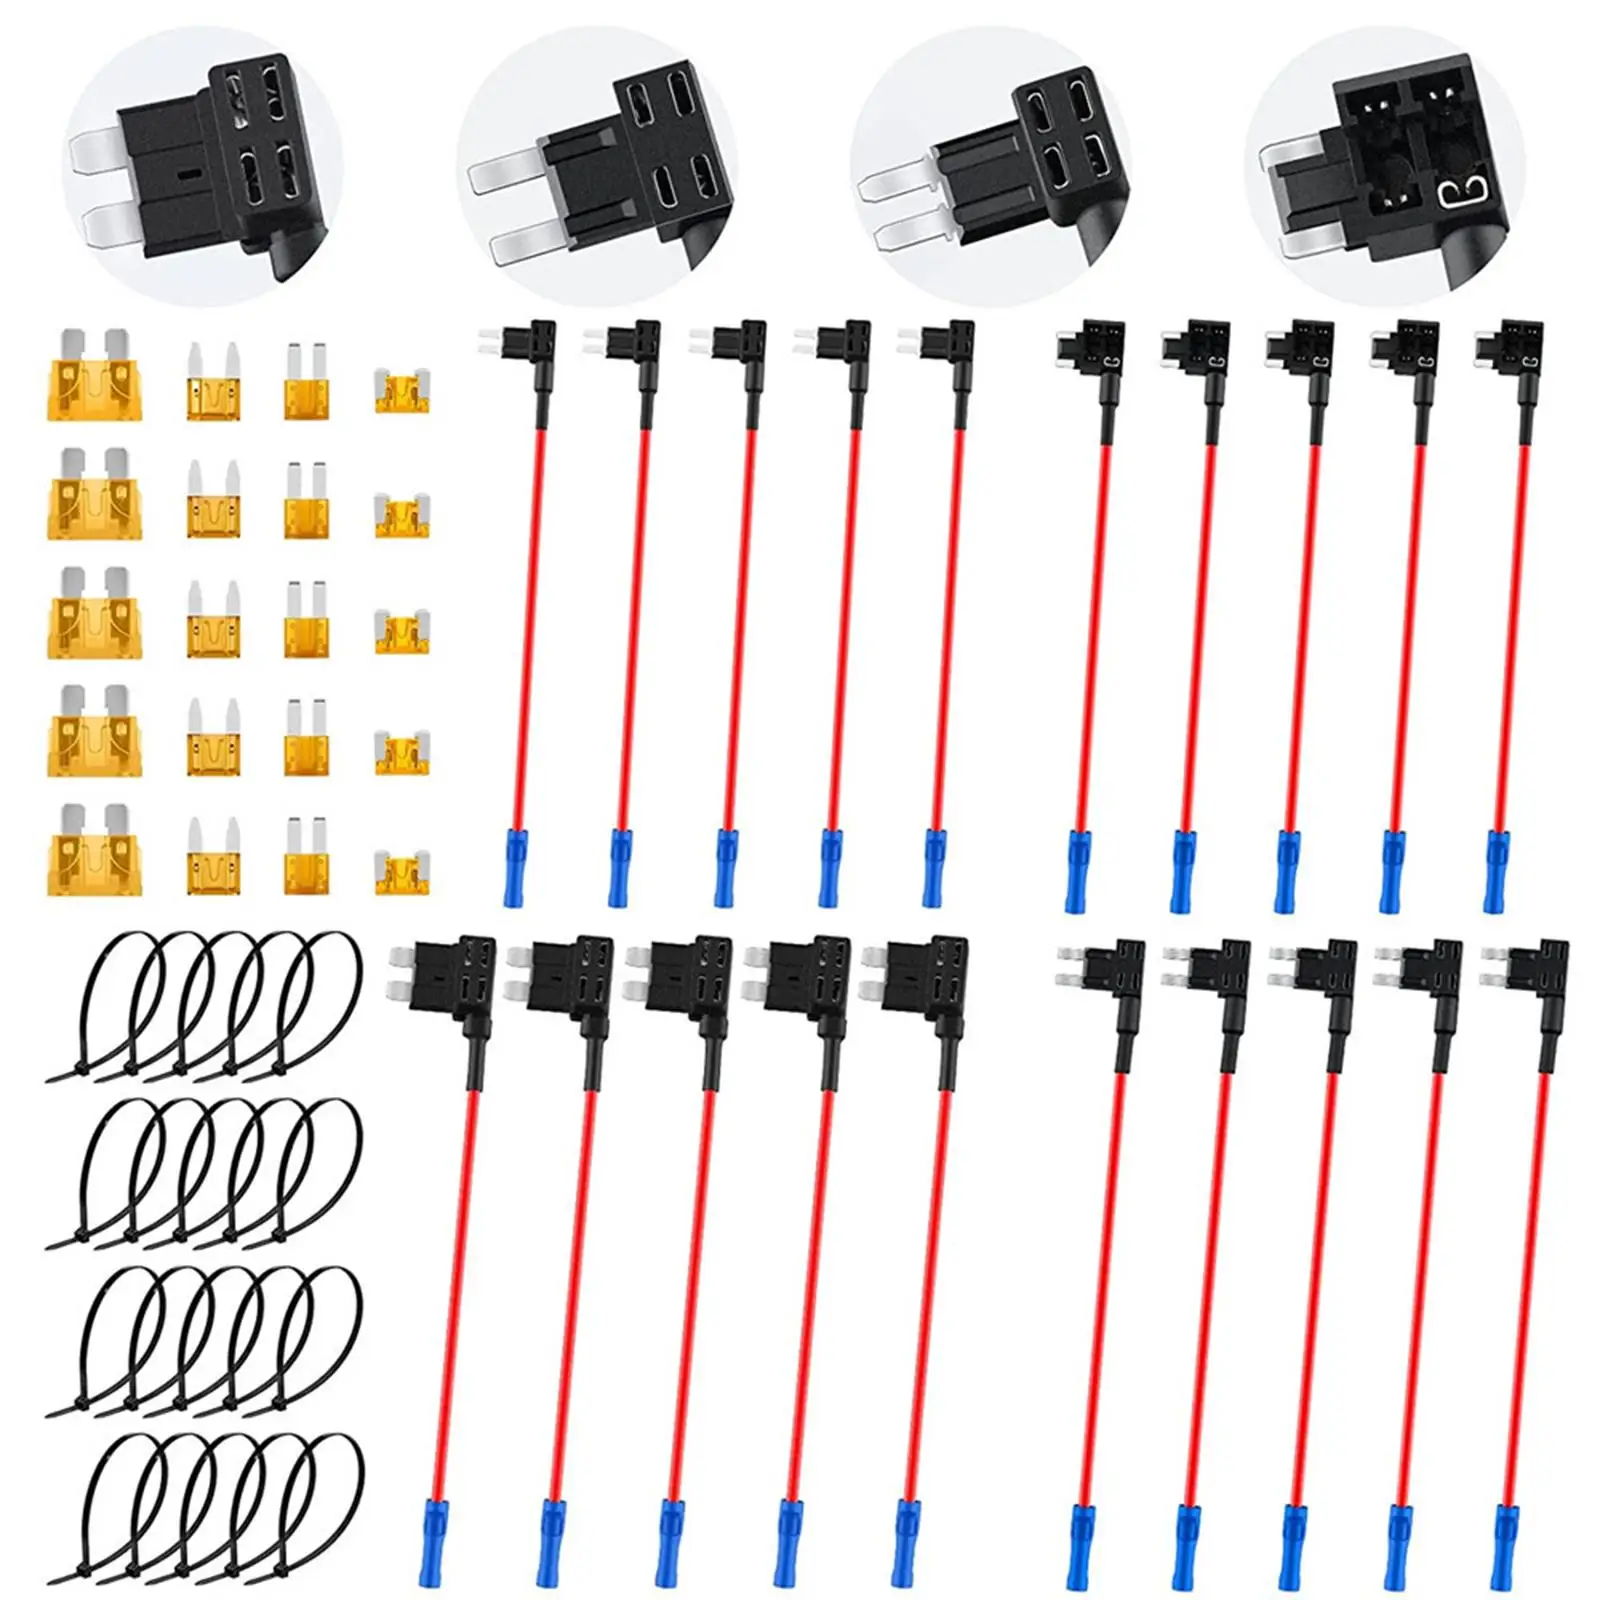 20 Pieces Car Add A Circuit Fuse Tap Adapter Set for Electronic Device